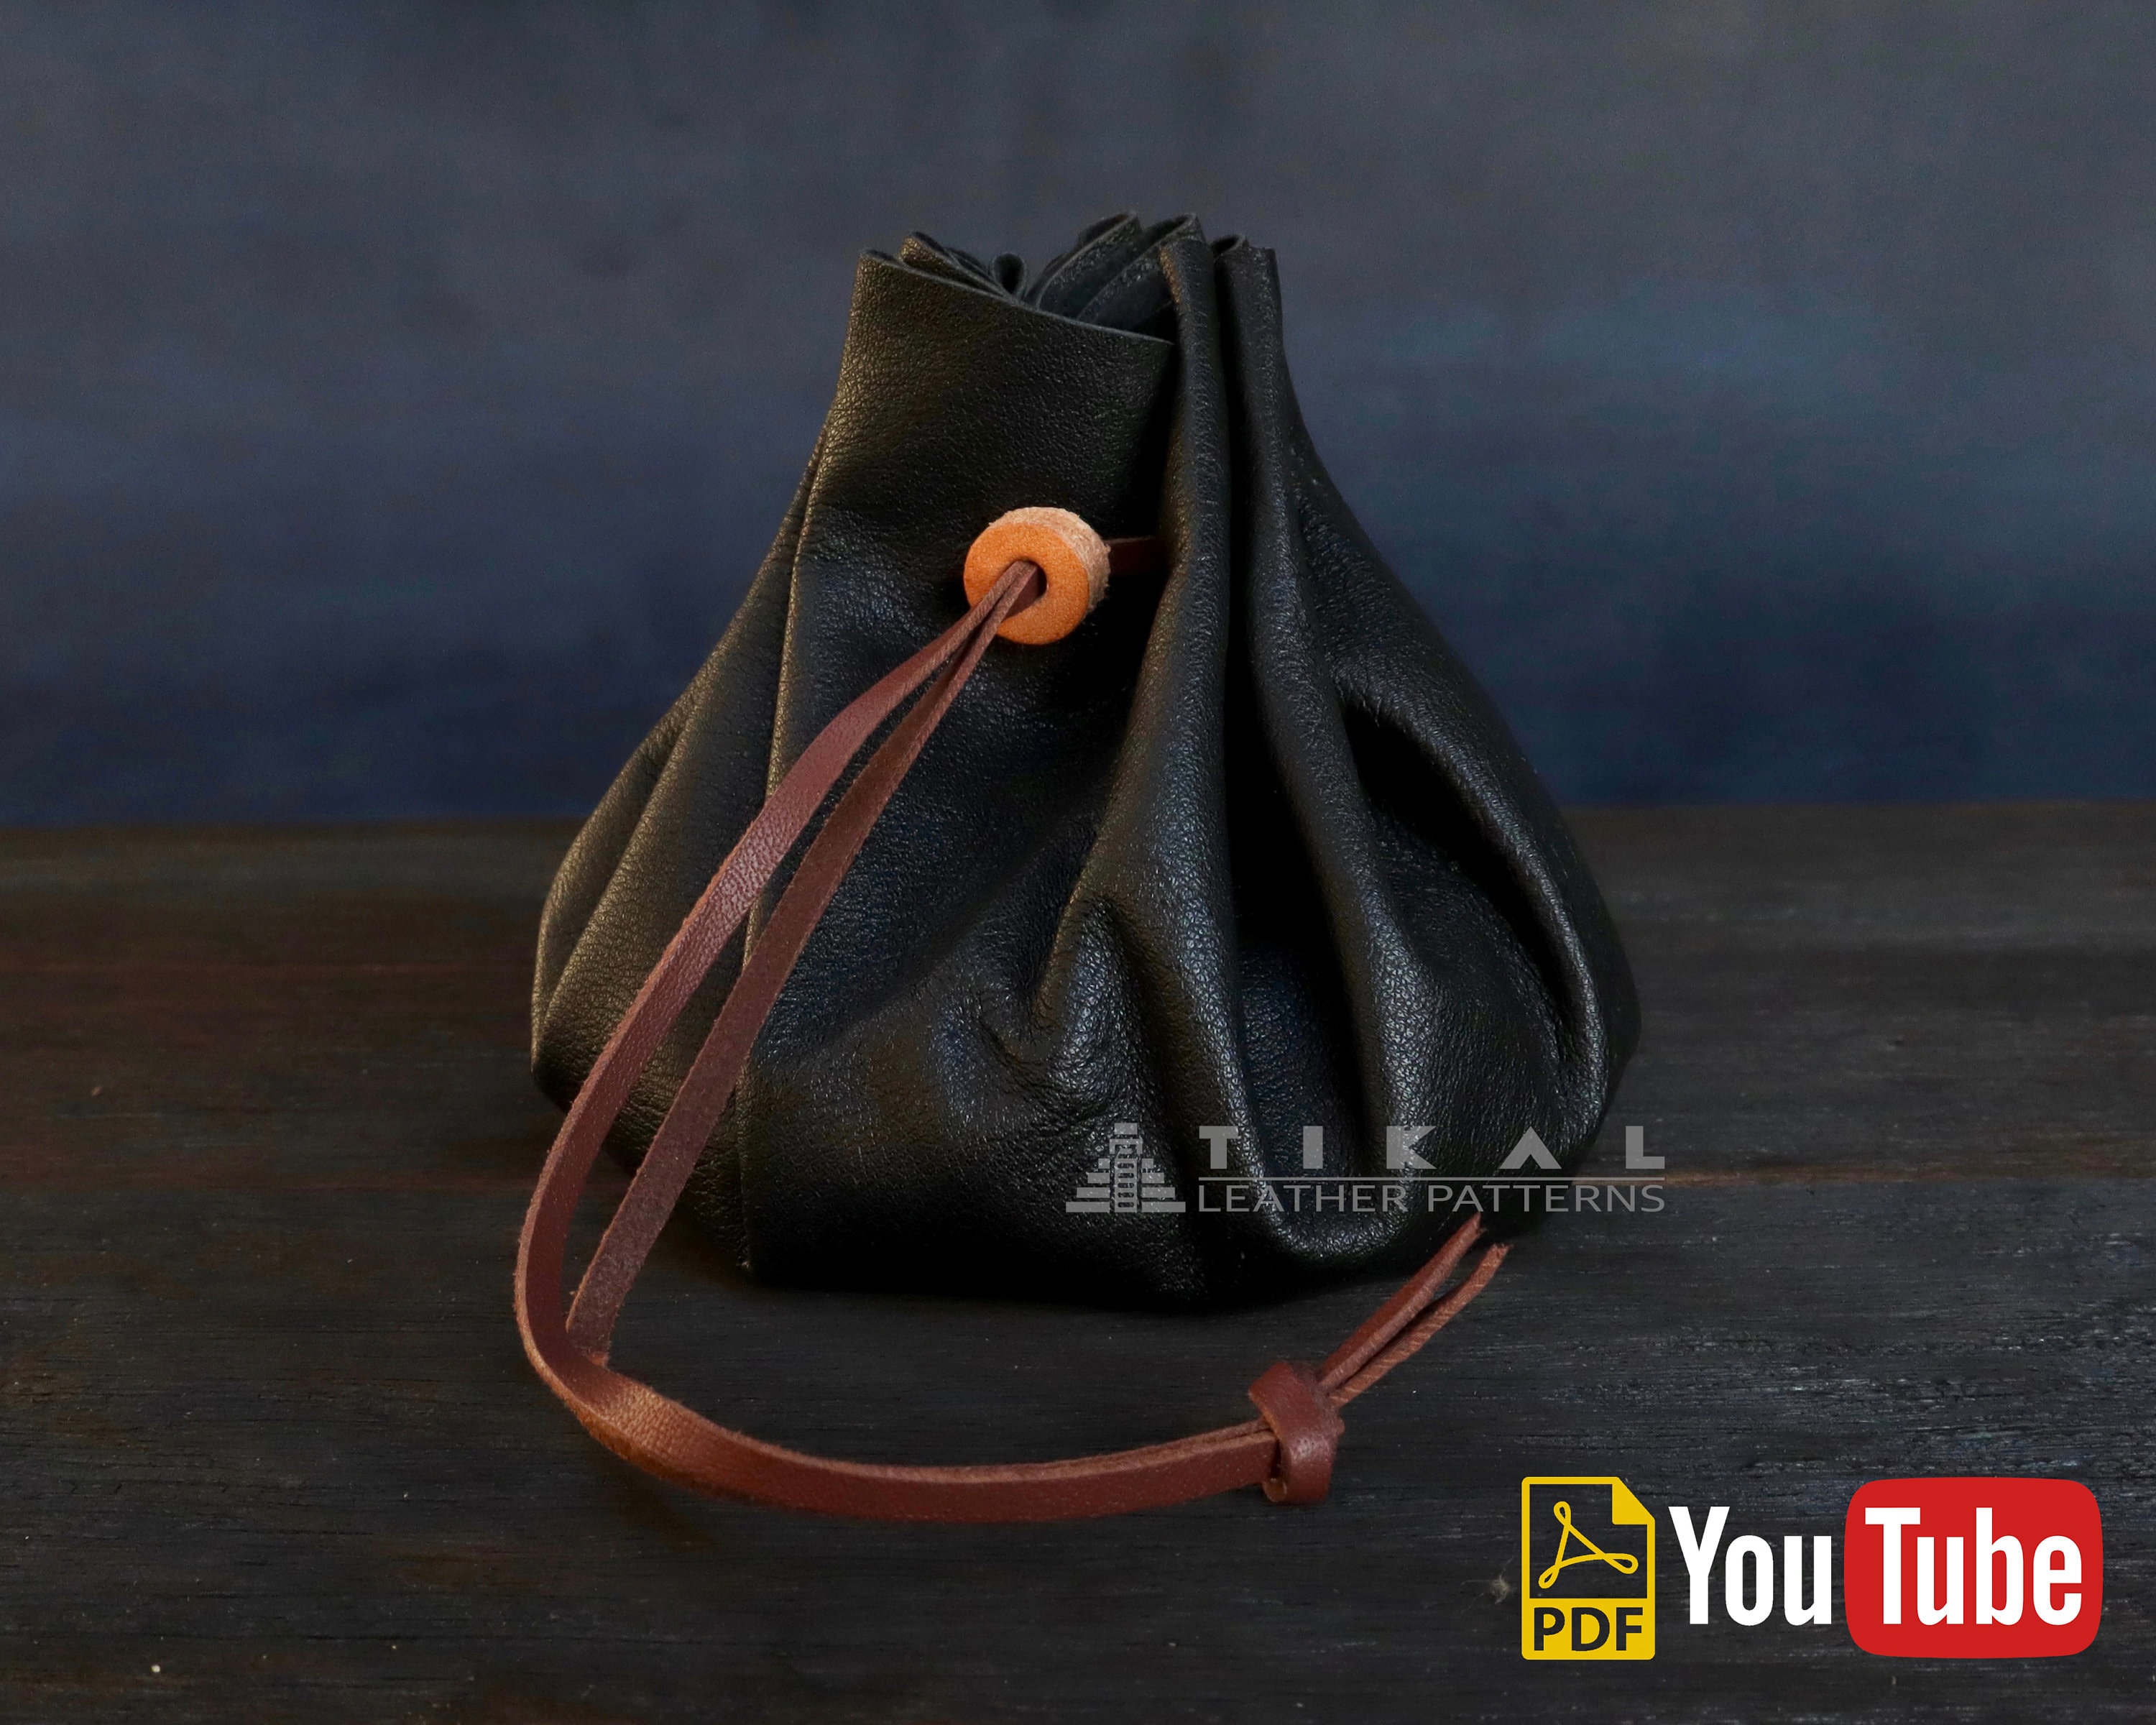 Drawstring Leather Pouch, Coin Purse, Dark Brown, Leather Pouch Bag, Small  Leather Pouch, Tobacco Pouch, Key Pouch, Money Pouch, Pouch Bags 